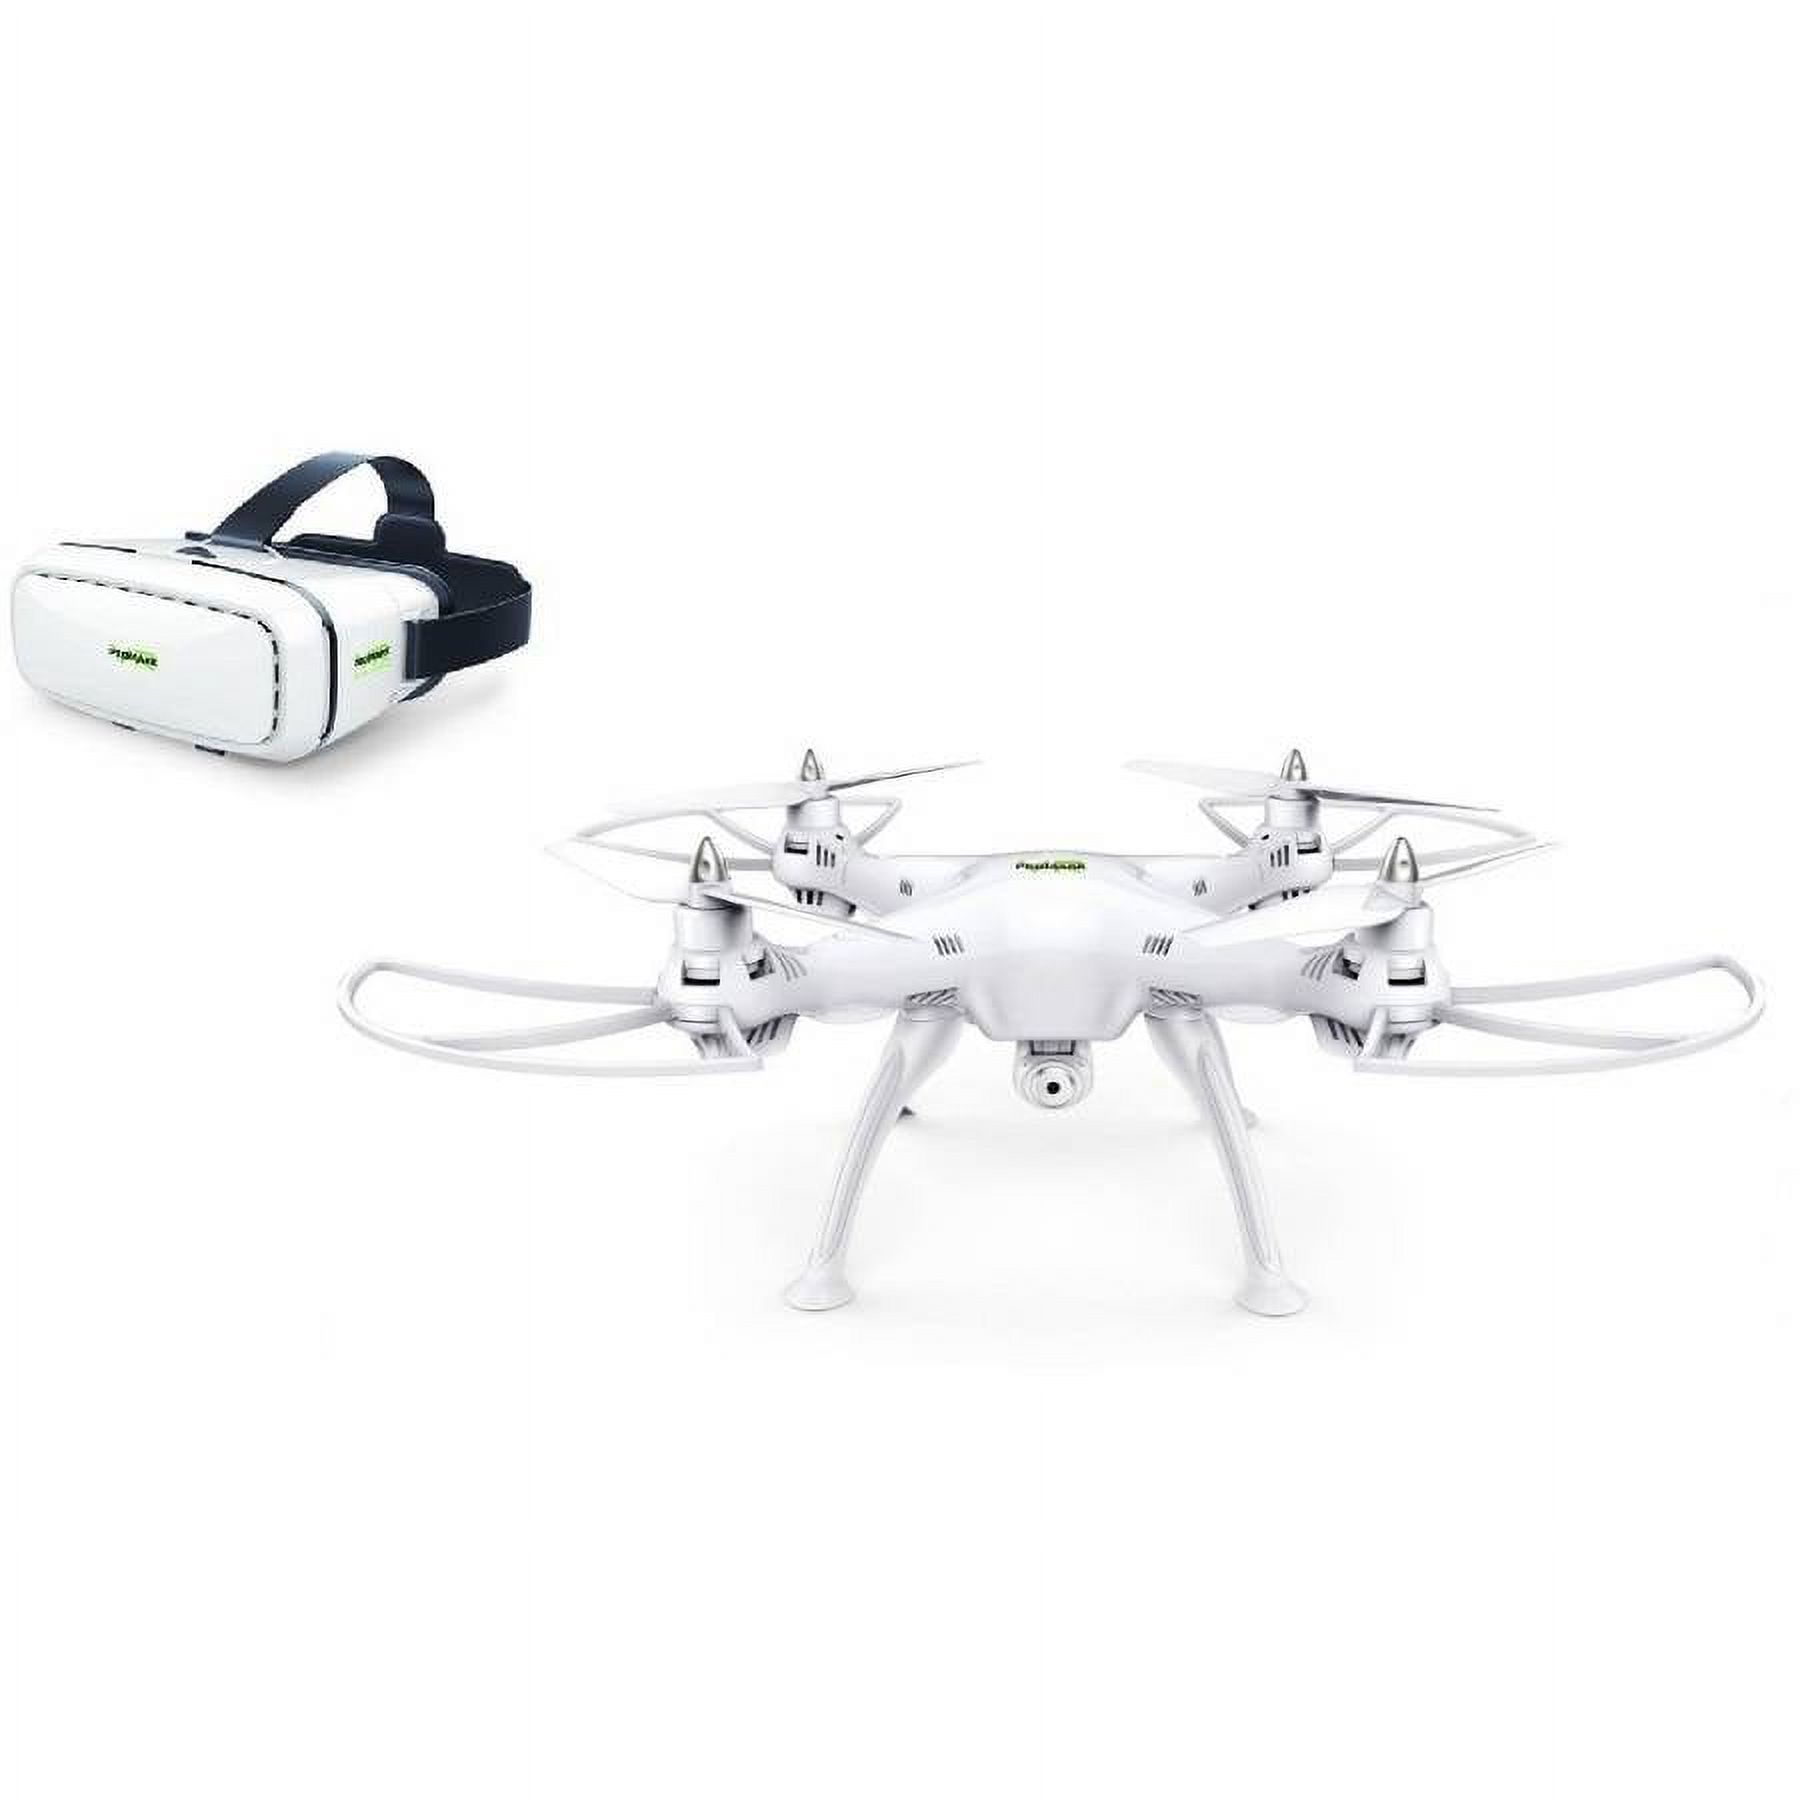 Promark Virtual Reality Drone P70 VR Drone - image 1 of 3